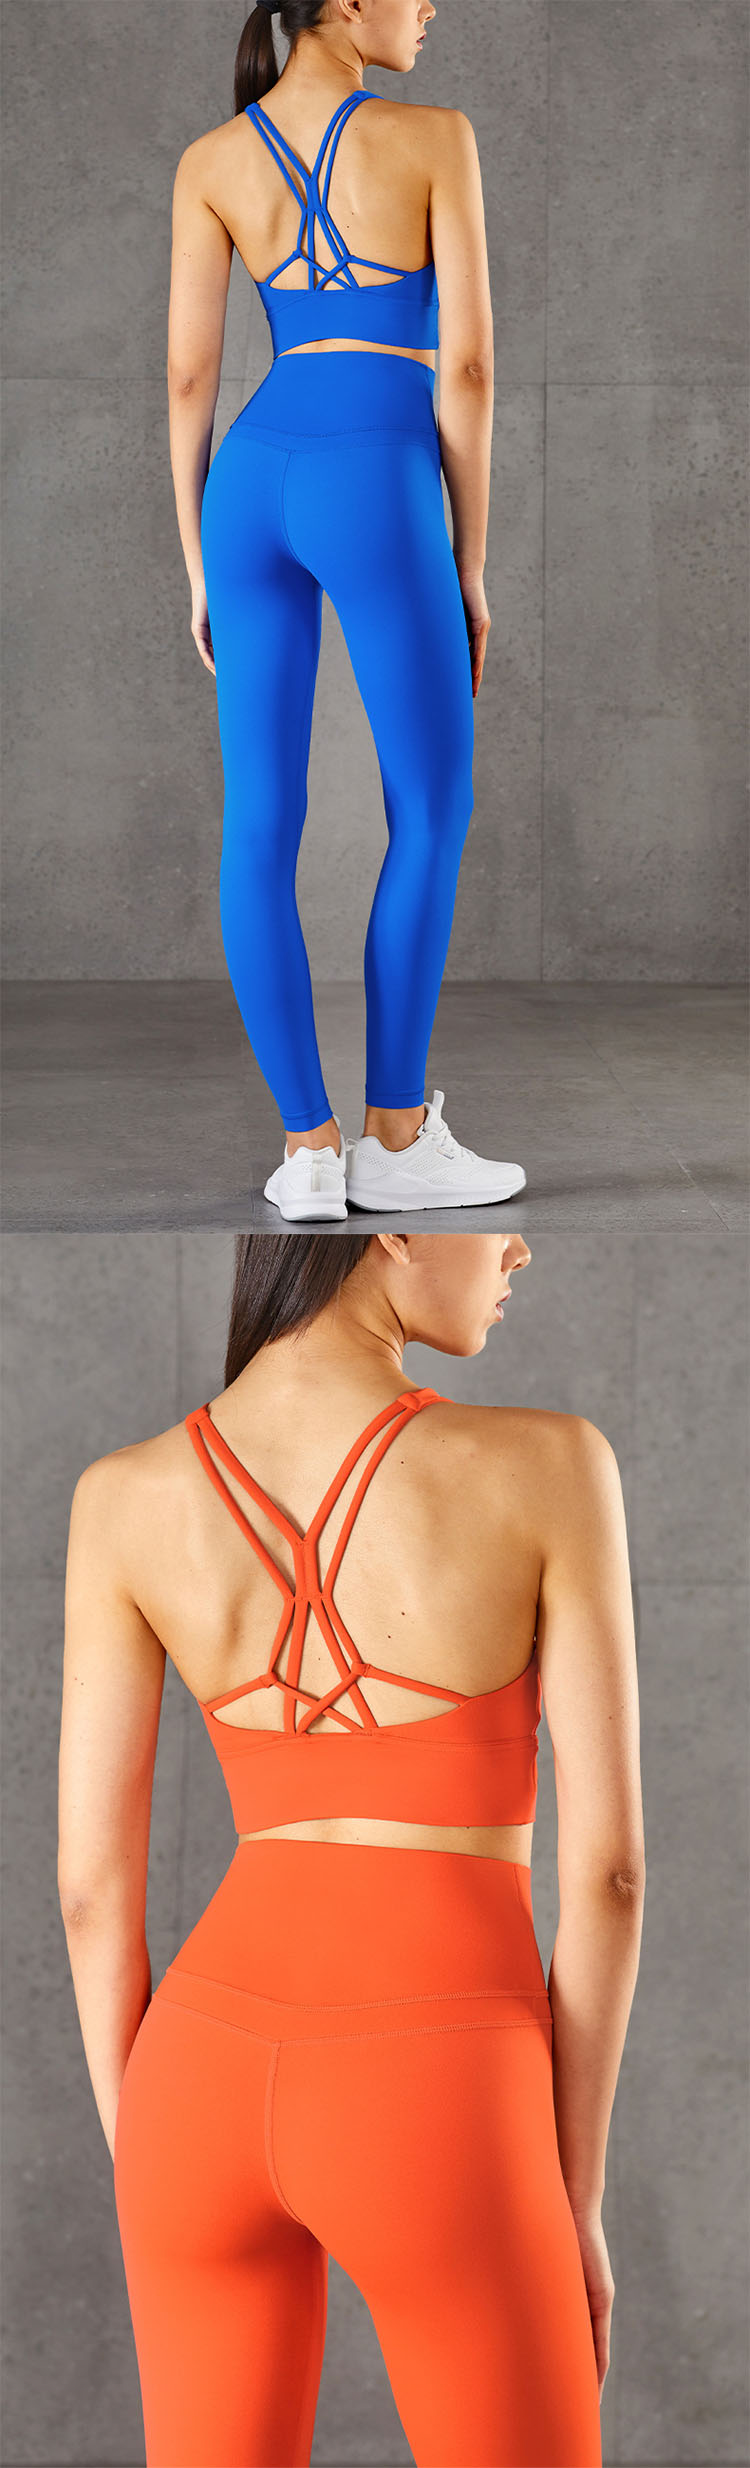 Open back design, good ventilation, cross-lacing allows you to be flexible.